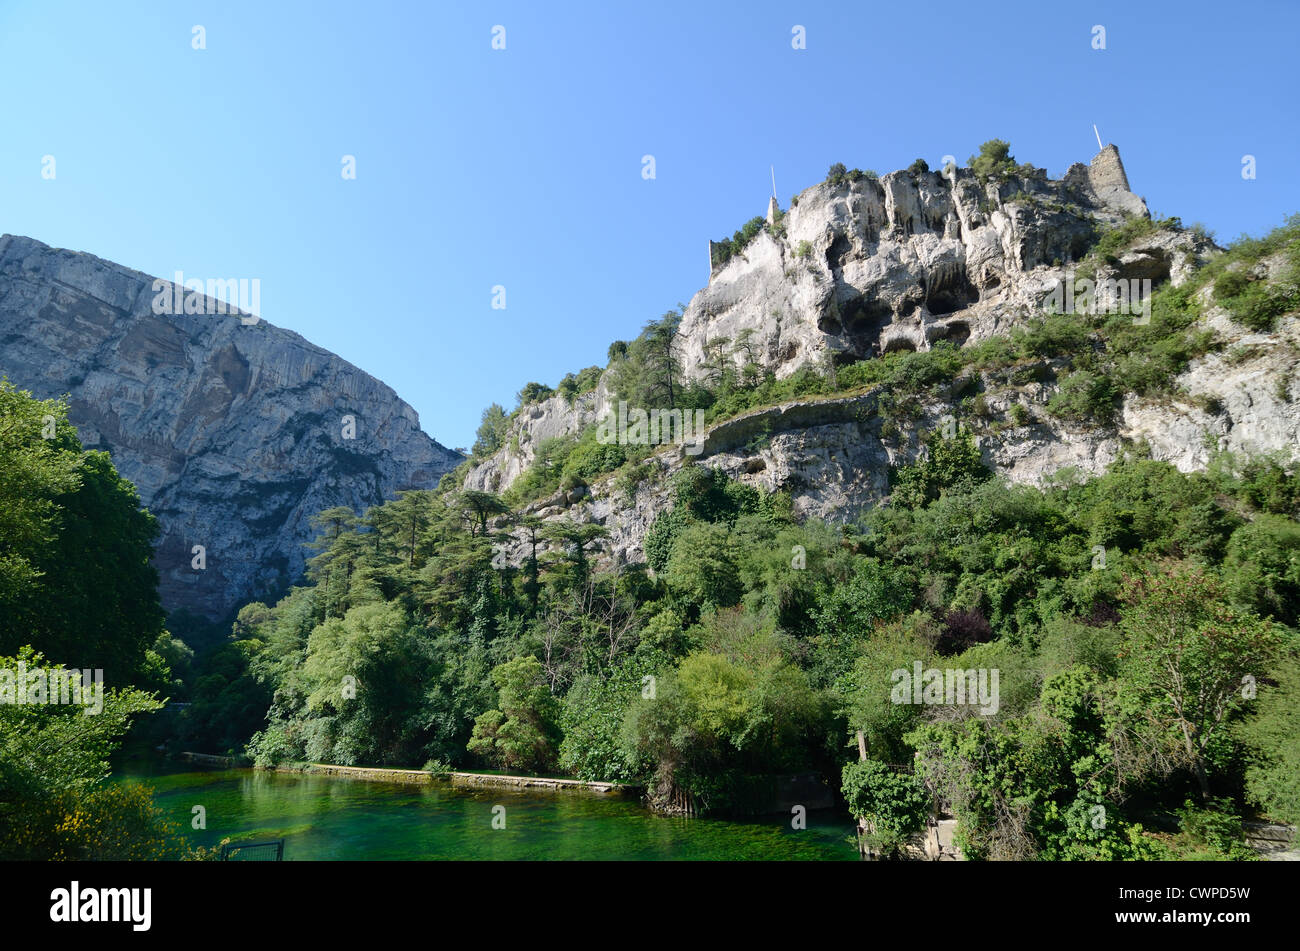 Ruined Castle, Château, Fort or Fortress and River Sorgue at Fontaine-de-Vaucluse Provence France Stock Photo